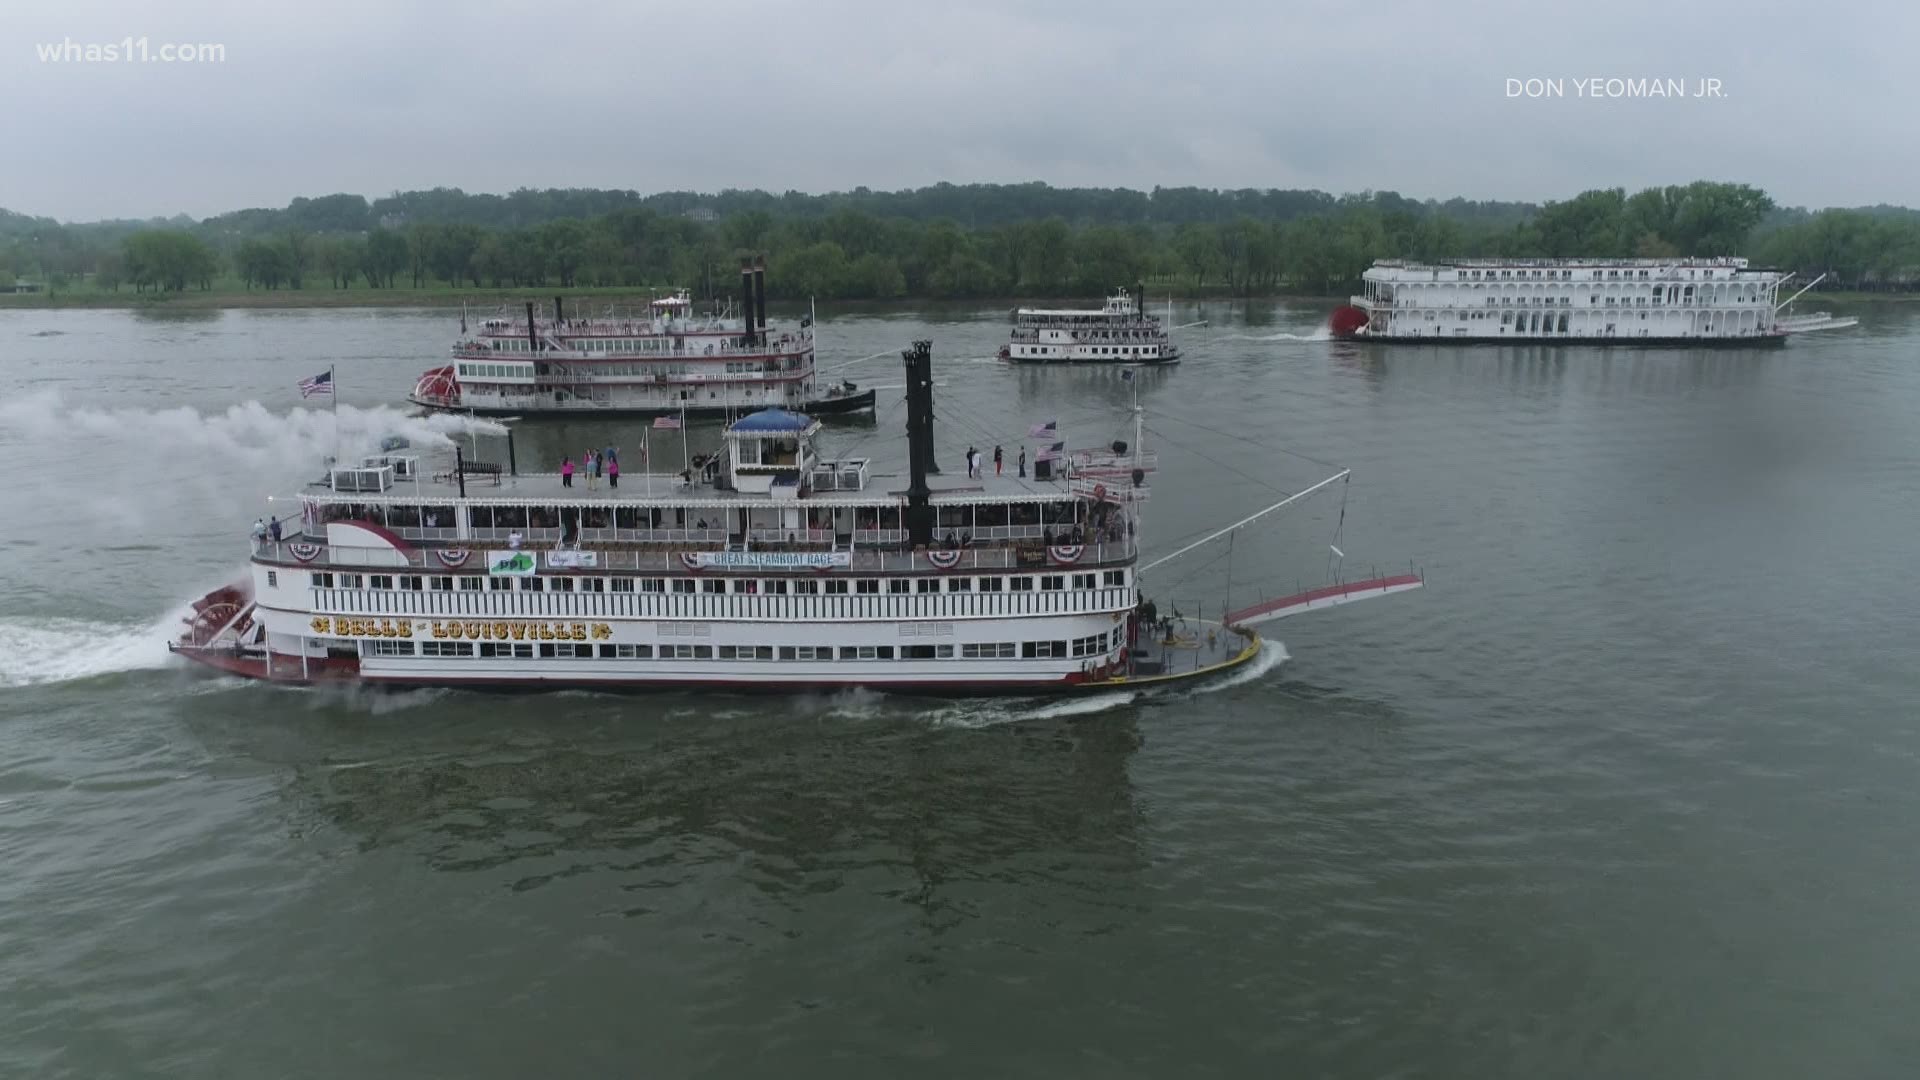 The Belle of Louisville is the winner of the silver antlers after this year's Great Steamboat Race.